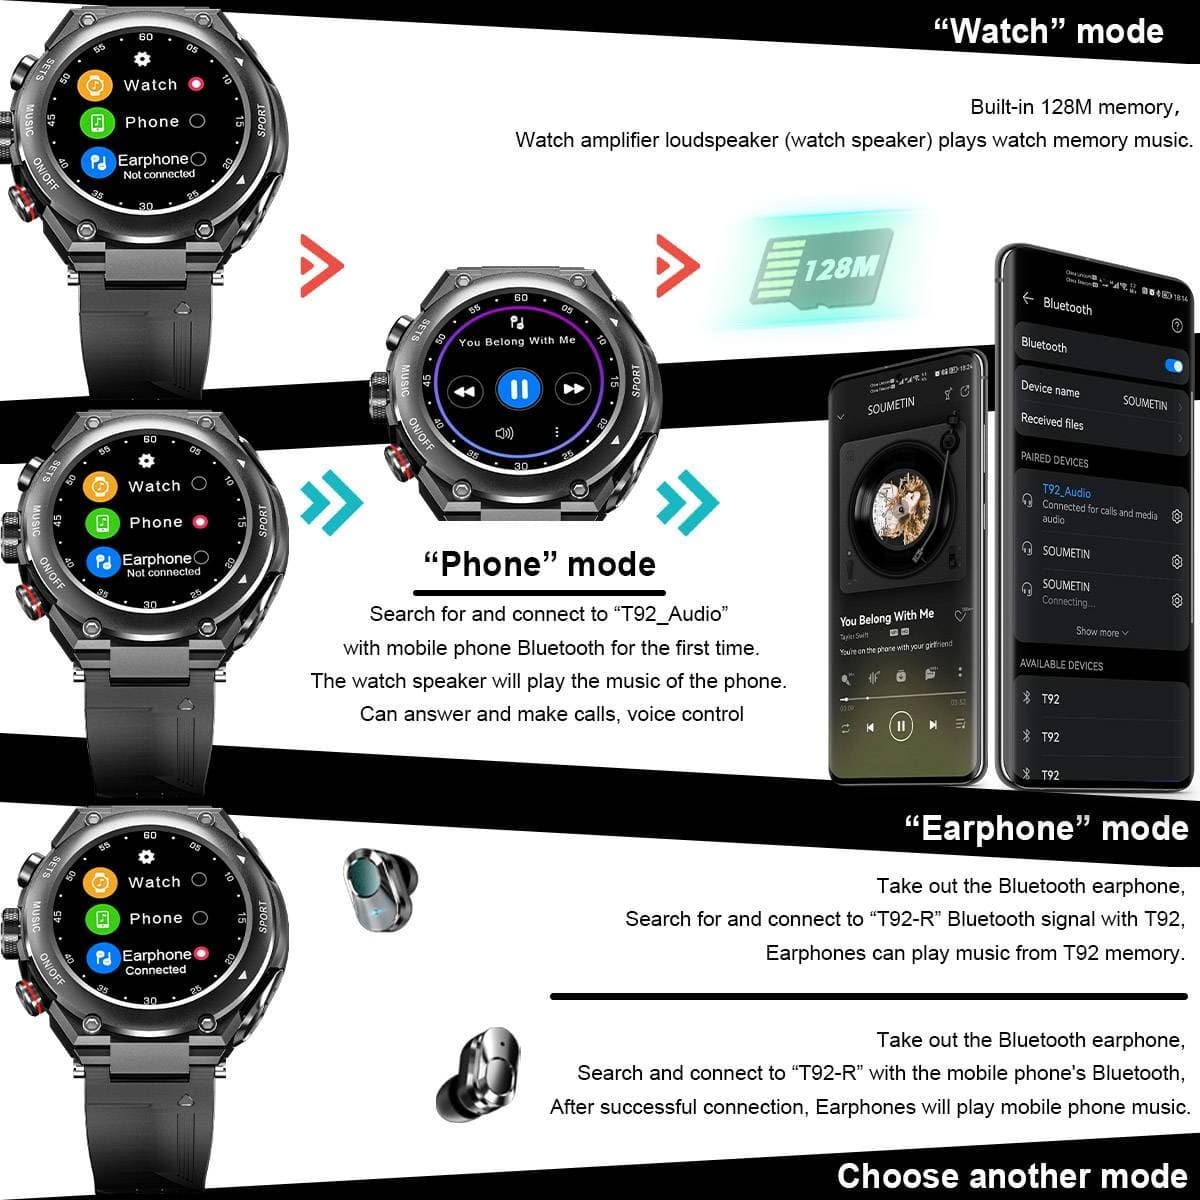 Restro™ - Sports Smartwatch with Wireless Earphones (Works with iPhone & Android)